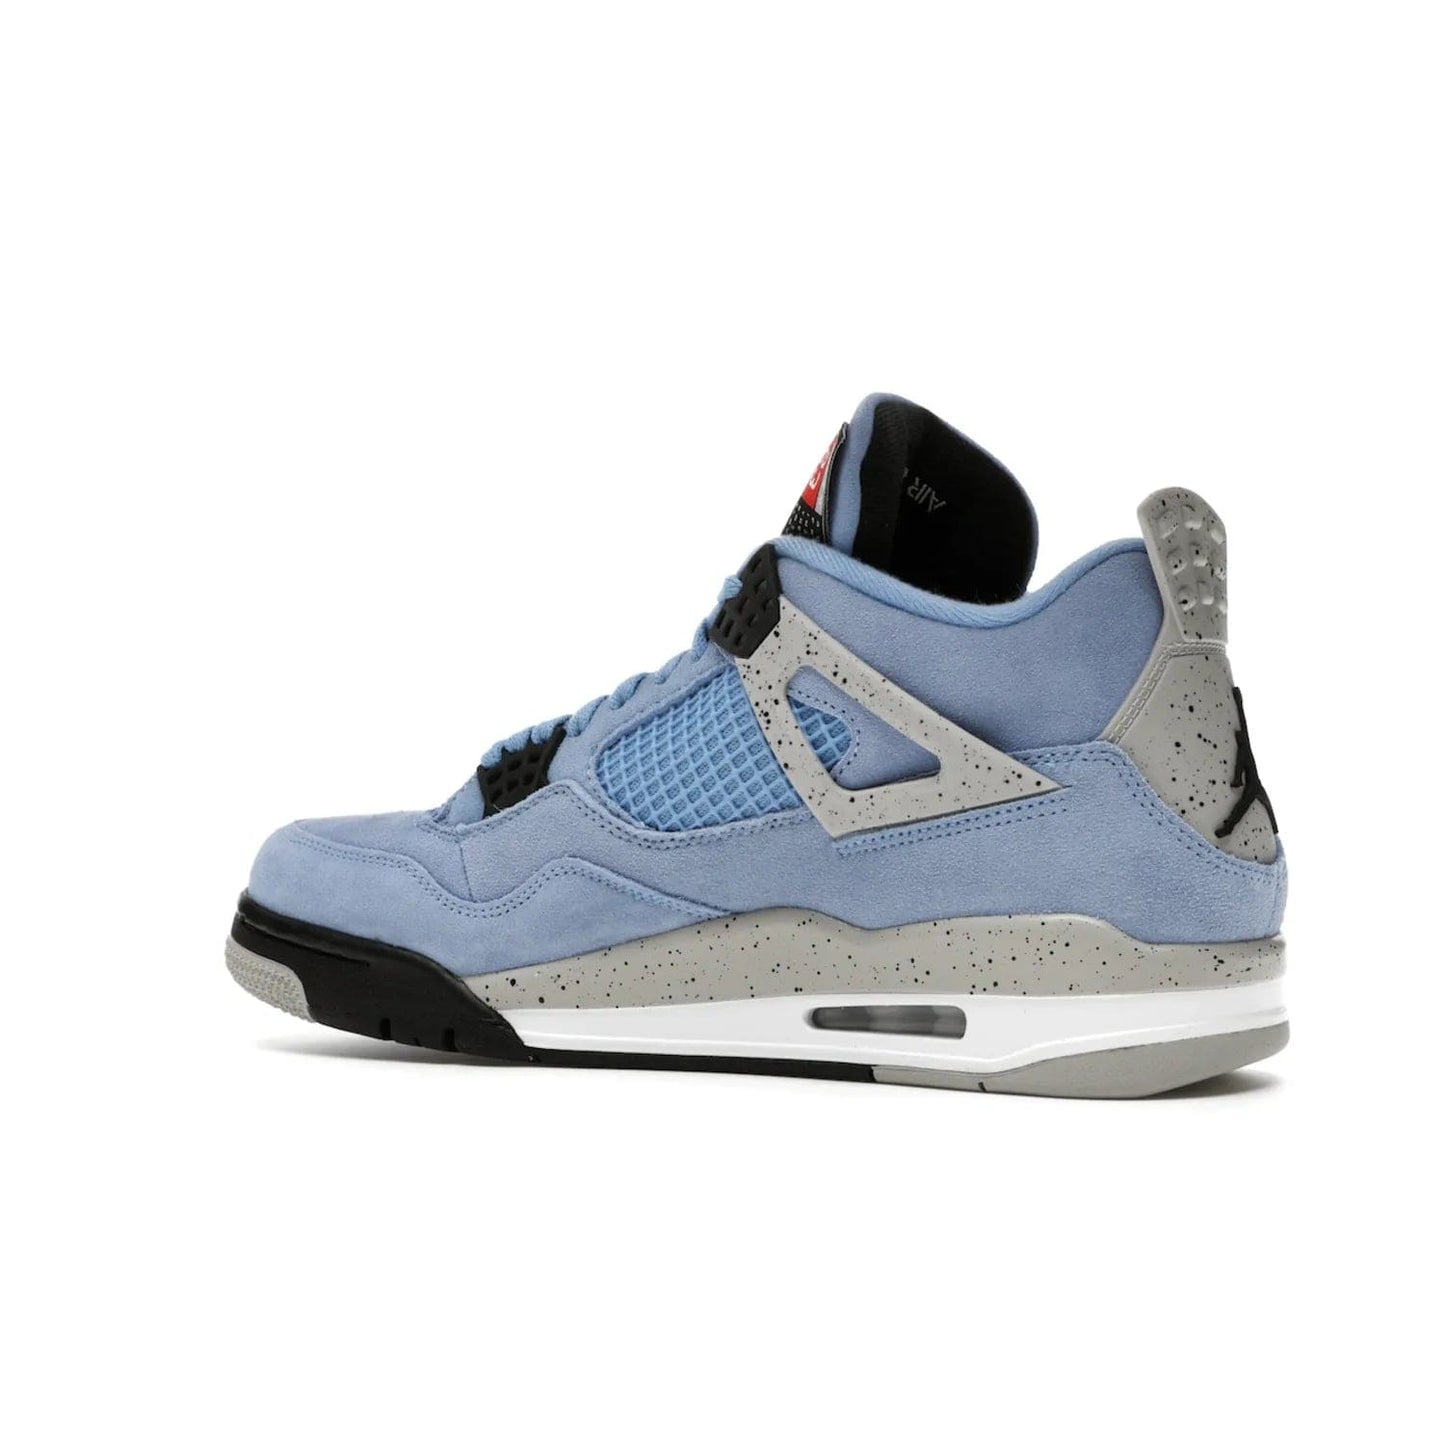 Jordan 4 Retro University Blue - Image 22 - Only at www.BallersClubKickz.com - The Air Jordan 4 University Blue honors MJ's alma mater. Rich University Blue suede, panels of netting, and Cement Grey speckled eyelets give this design an edgy look. Features a black, white and Tech Grey sole with a clear Air unit and two woven labels on the tongue. Jumpman logo & Team Jordan jock tag included. Released April 2021.